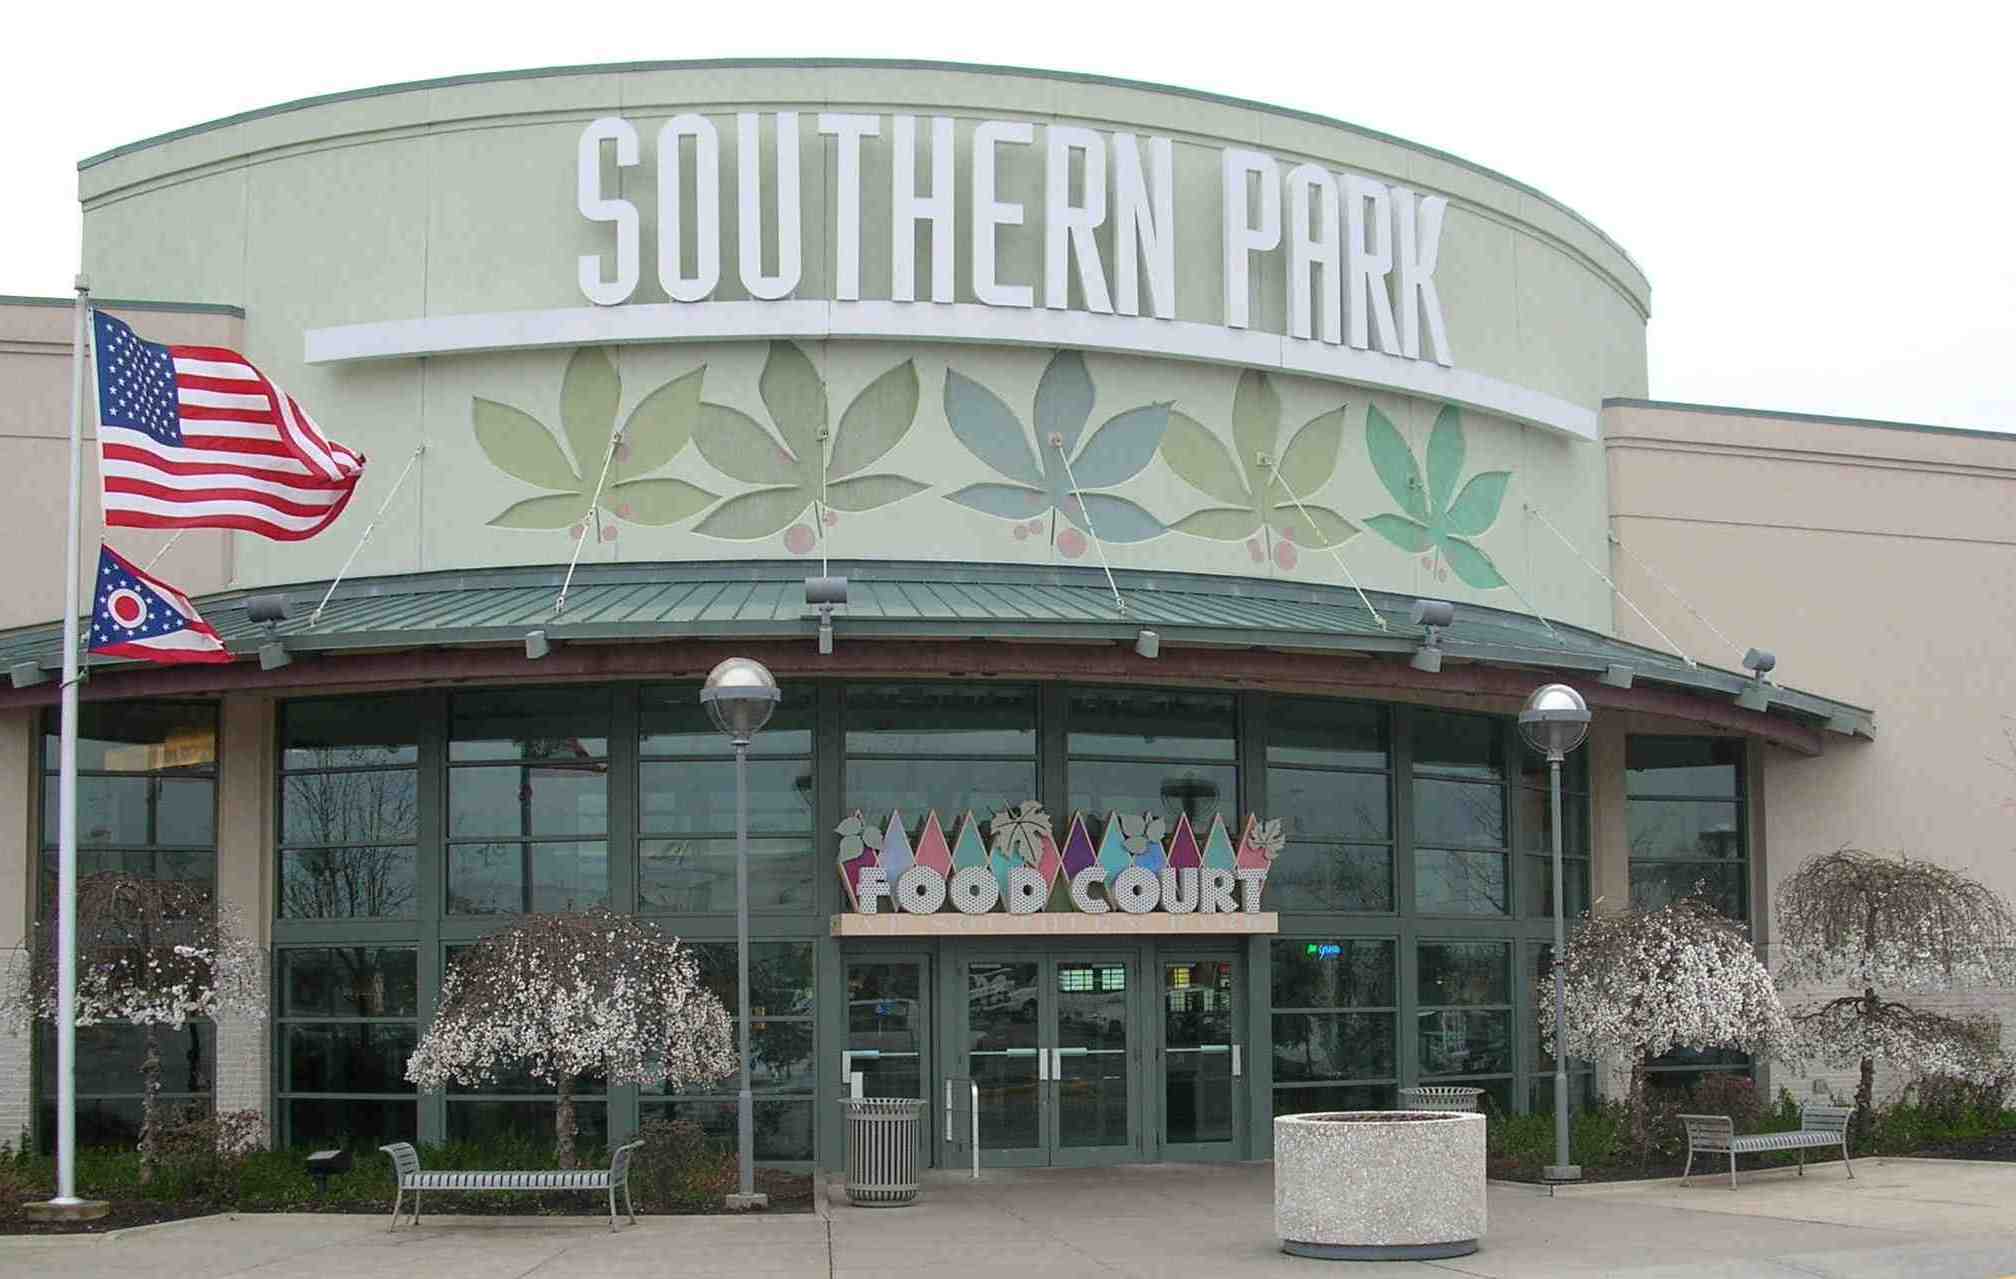 Southern Park Mall